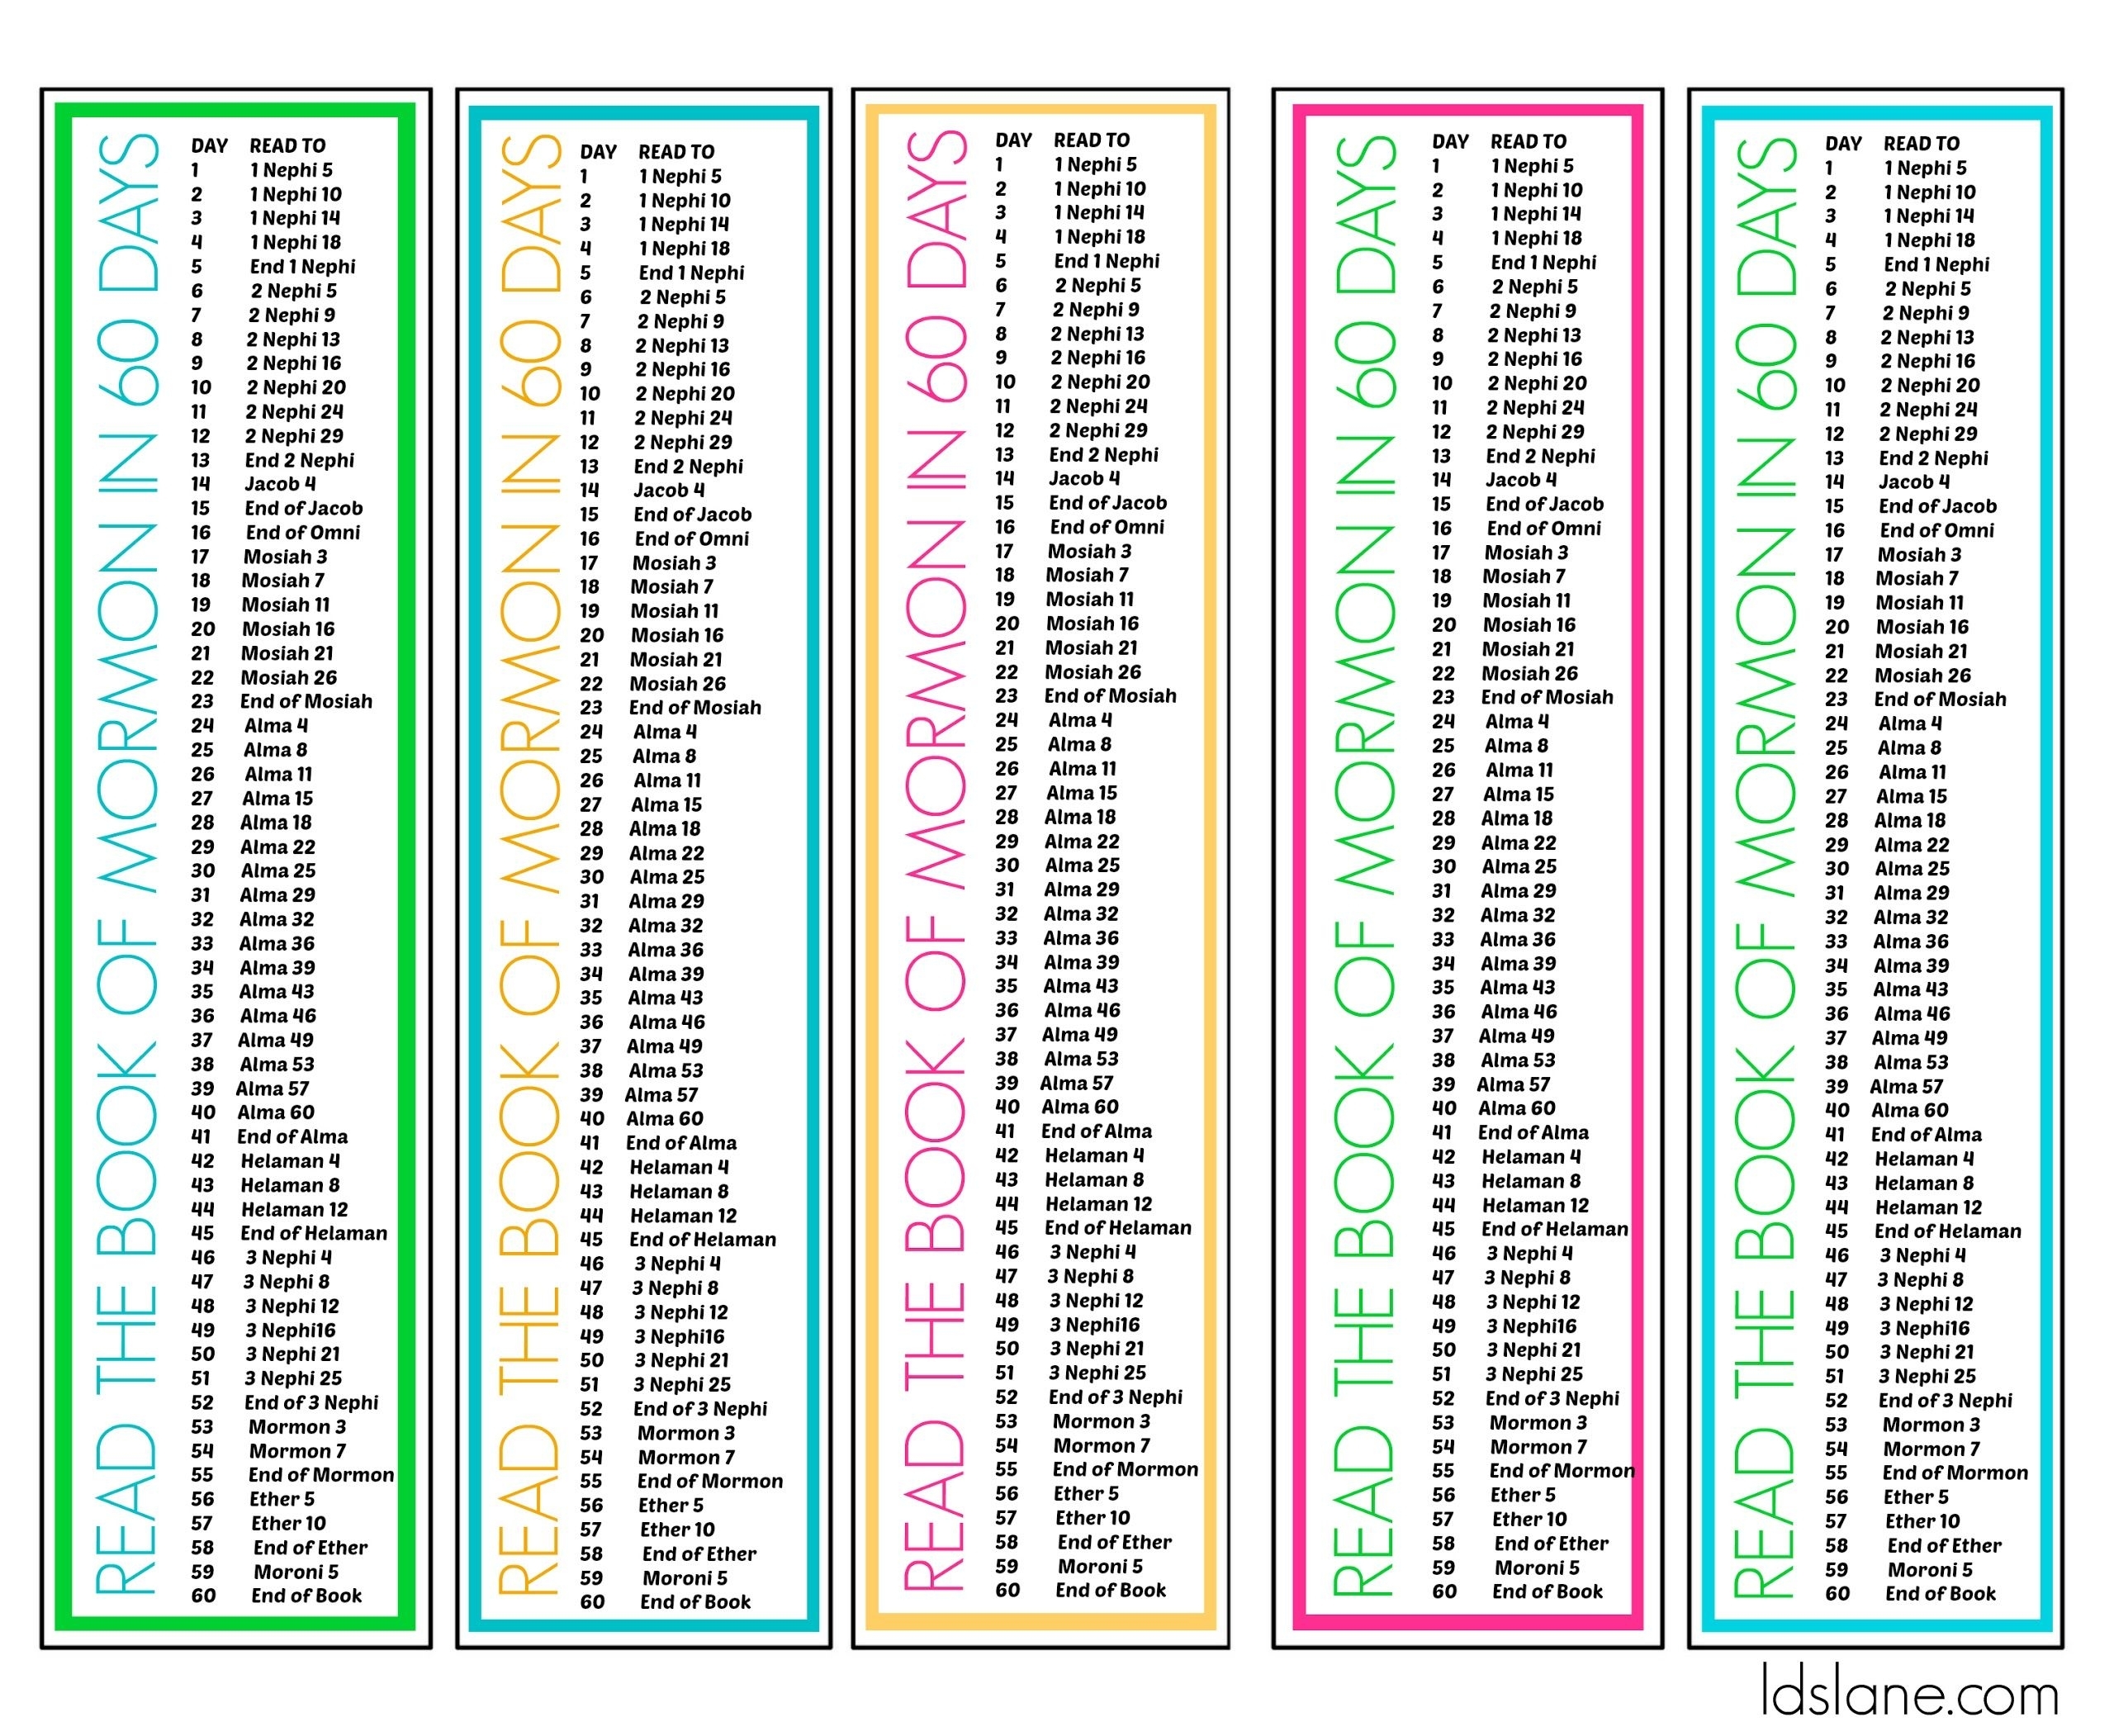 Read The Book Of Mormon In 60 Days-Printable Bookmarks | Church throughout 60 Days Challenge Template Calender